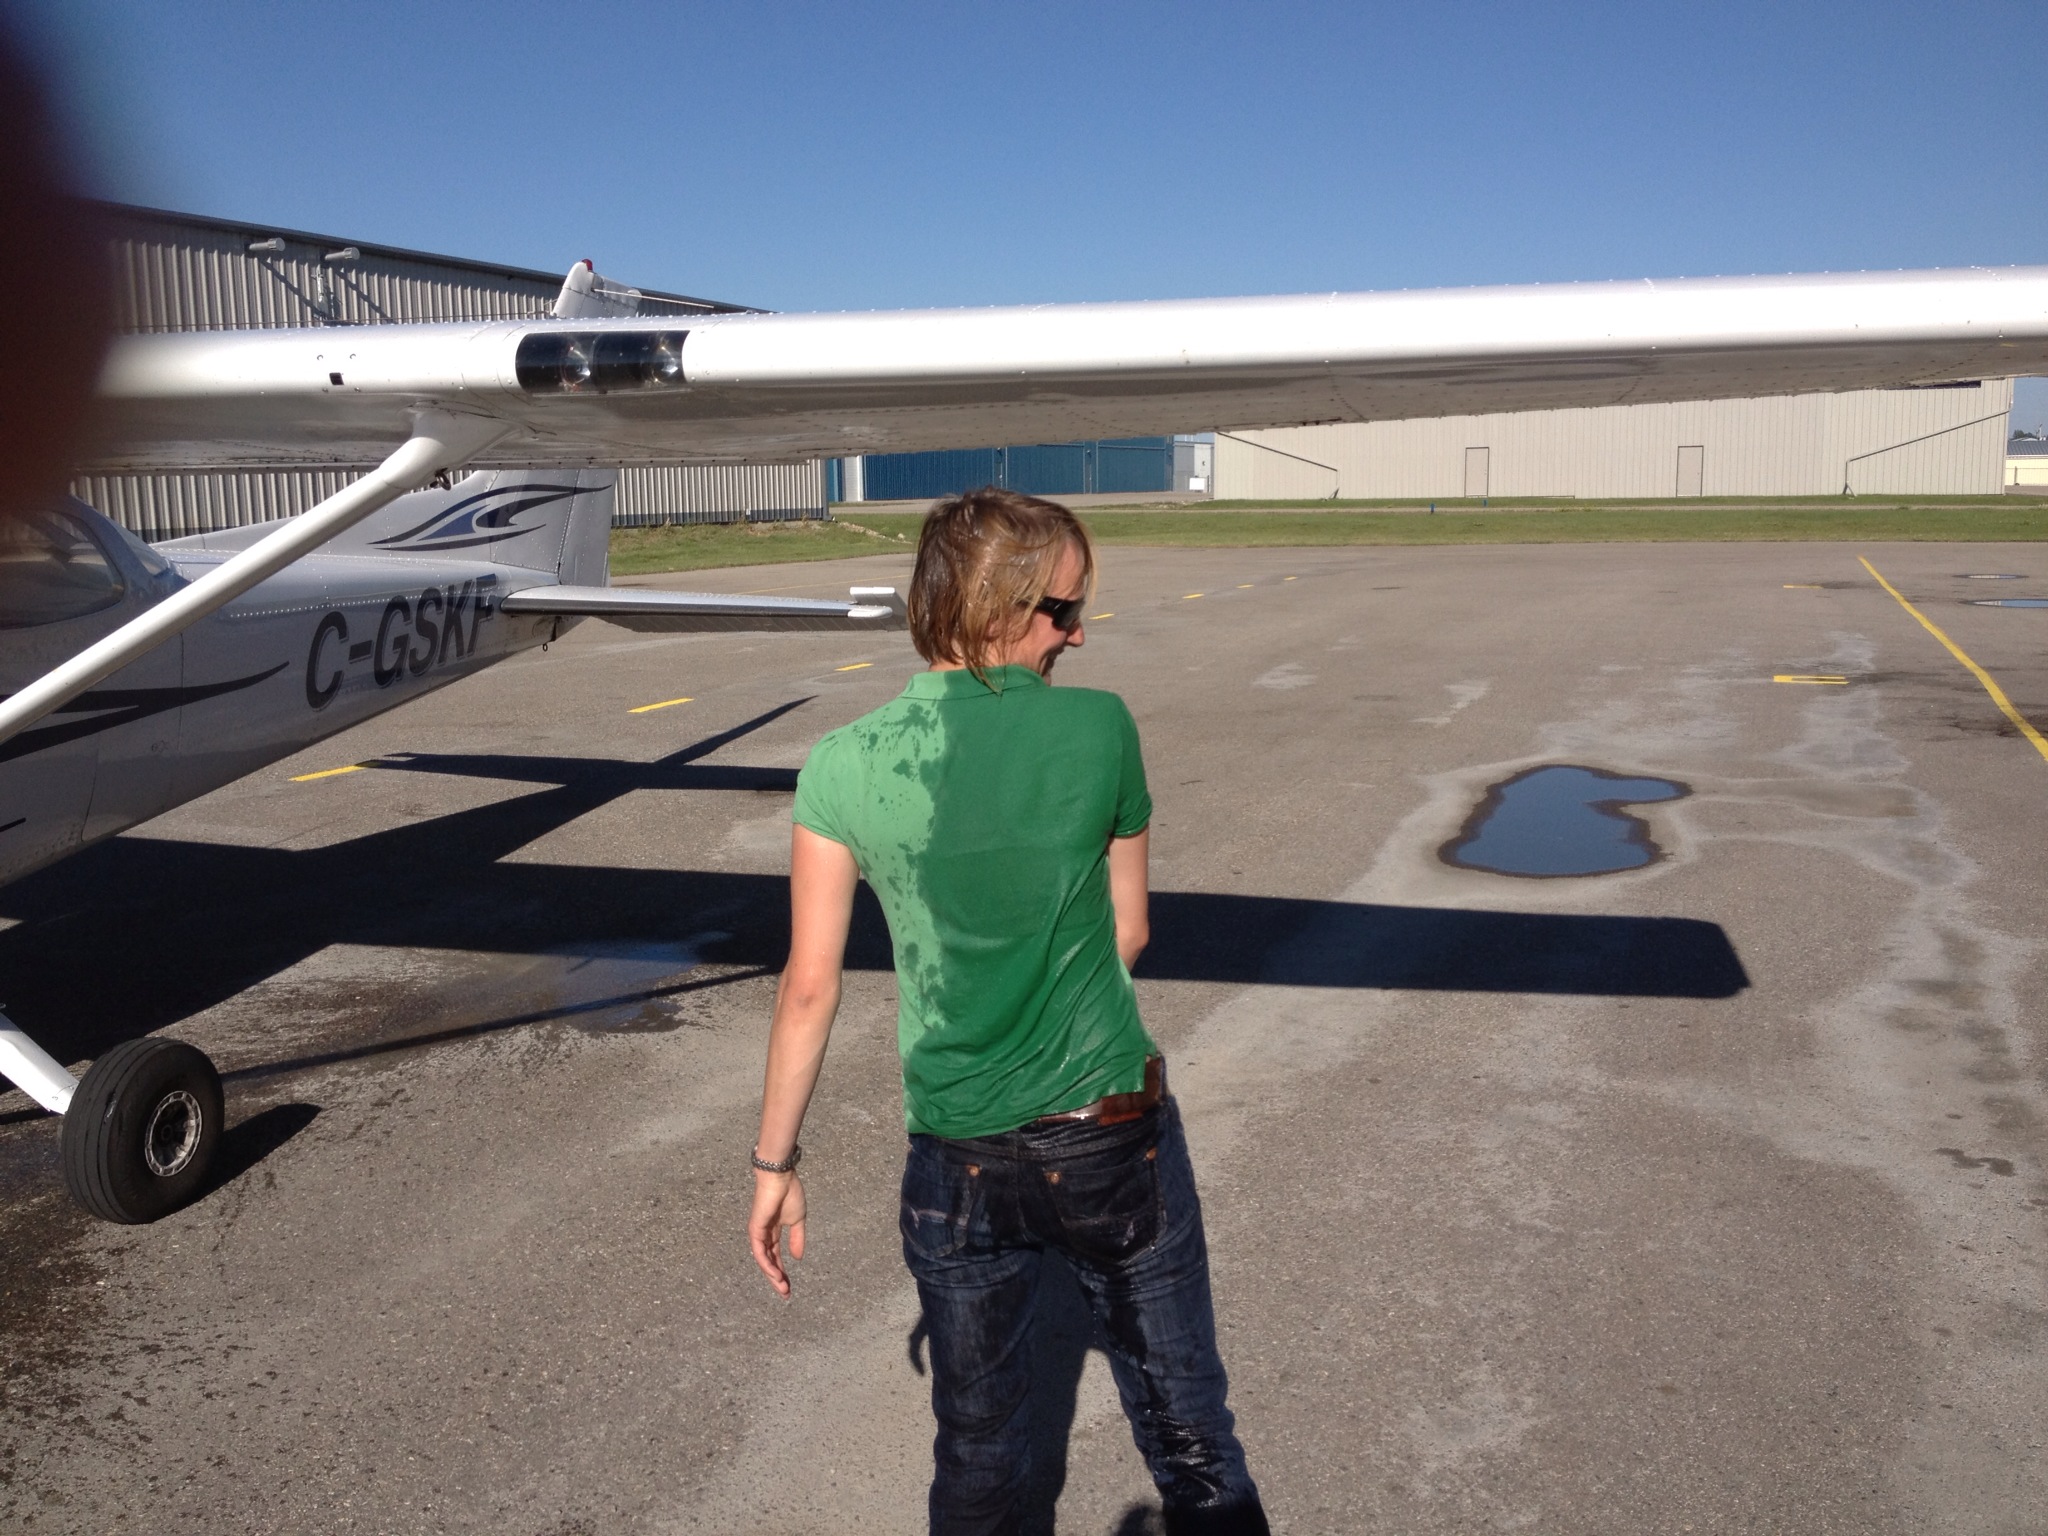 First solo initiation